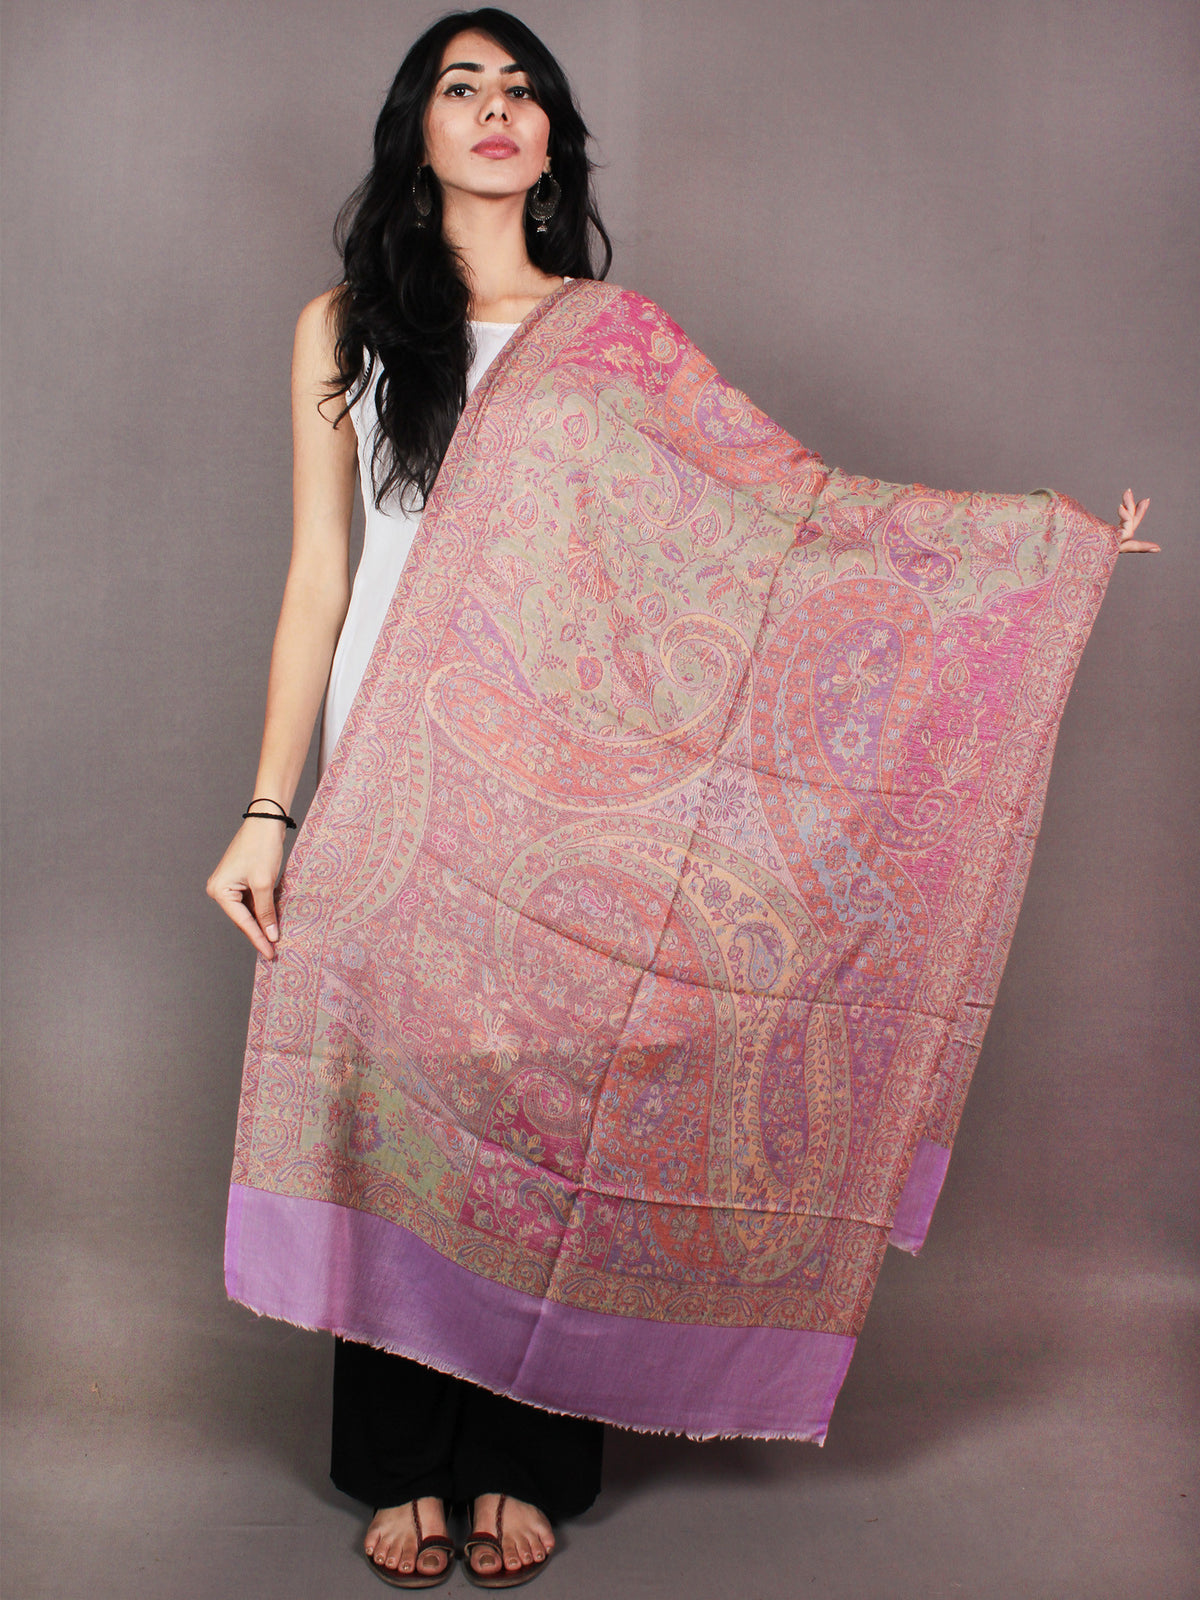 Rose Pink Multi Colour Pure Wool Jamawar Cashmere Stole from Kashmir - S6317115